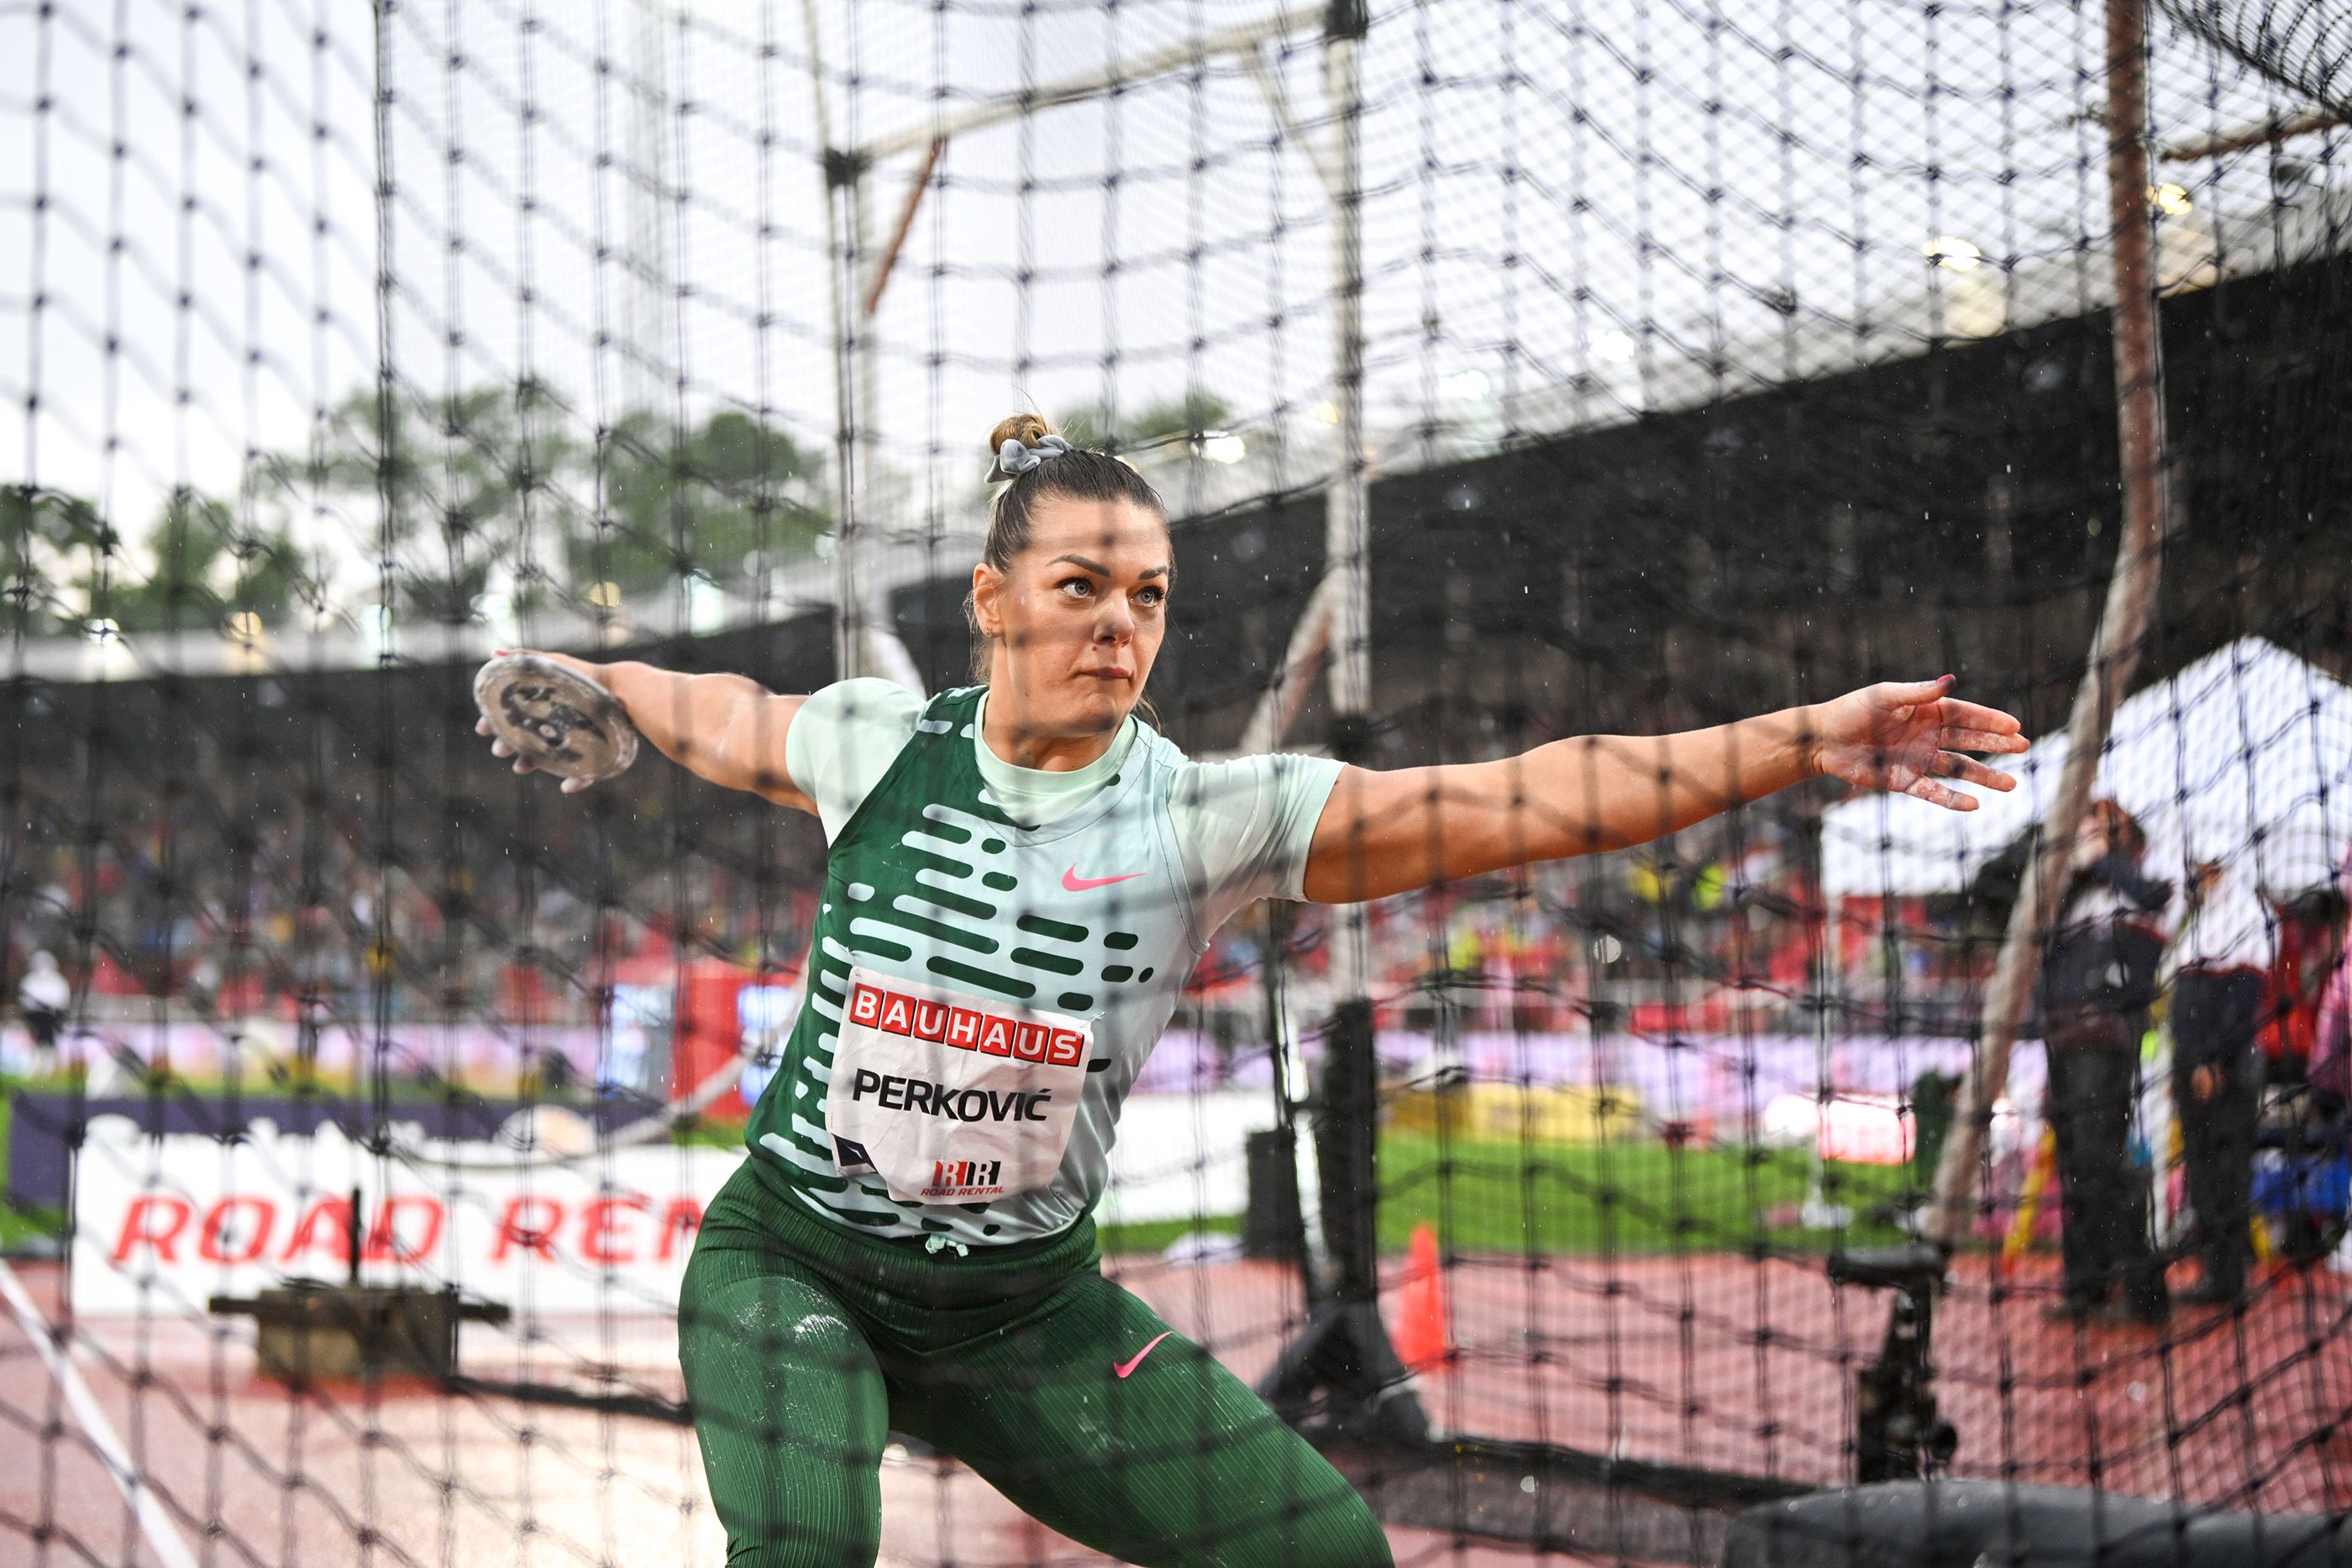 Discus star Sandra Perkovic competes in Stockholm